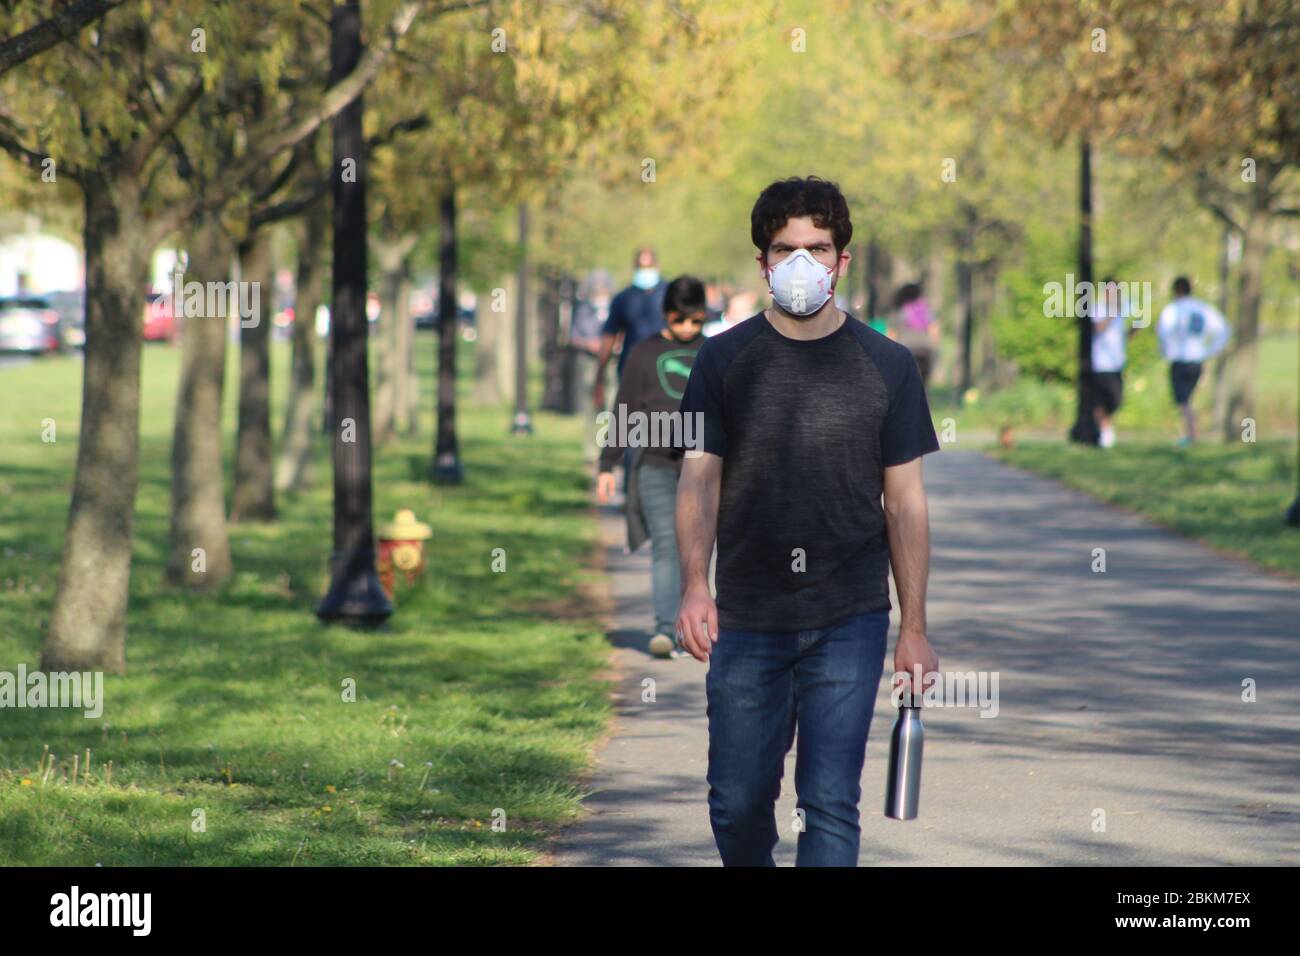 Jersey City, New Jersey, USA. 3rd May, 2020. This masked face man walks  alone down an alley in Liberty State Park in Jersey City while passing  other pedestrians. Residents have gathered in